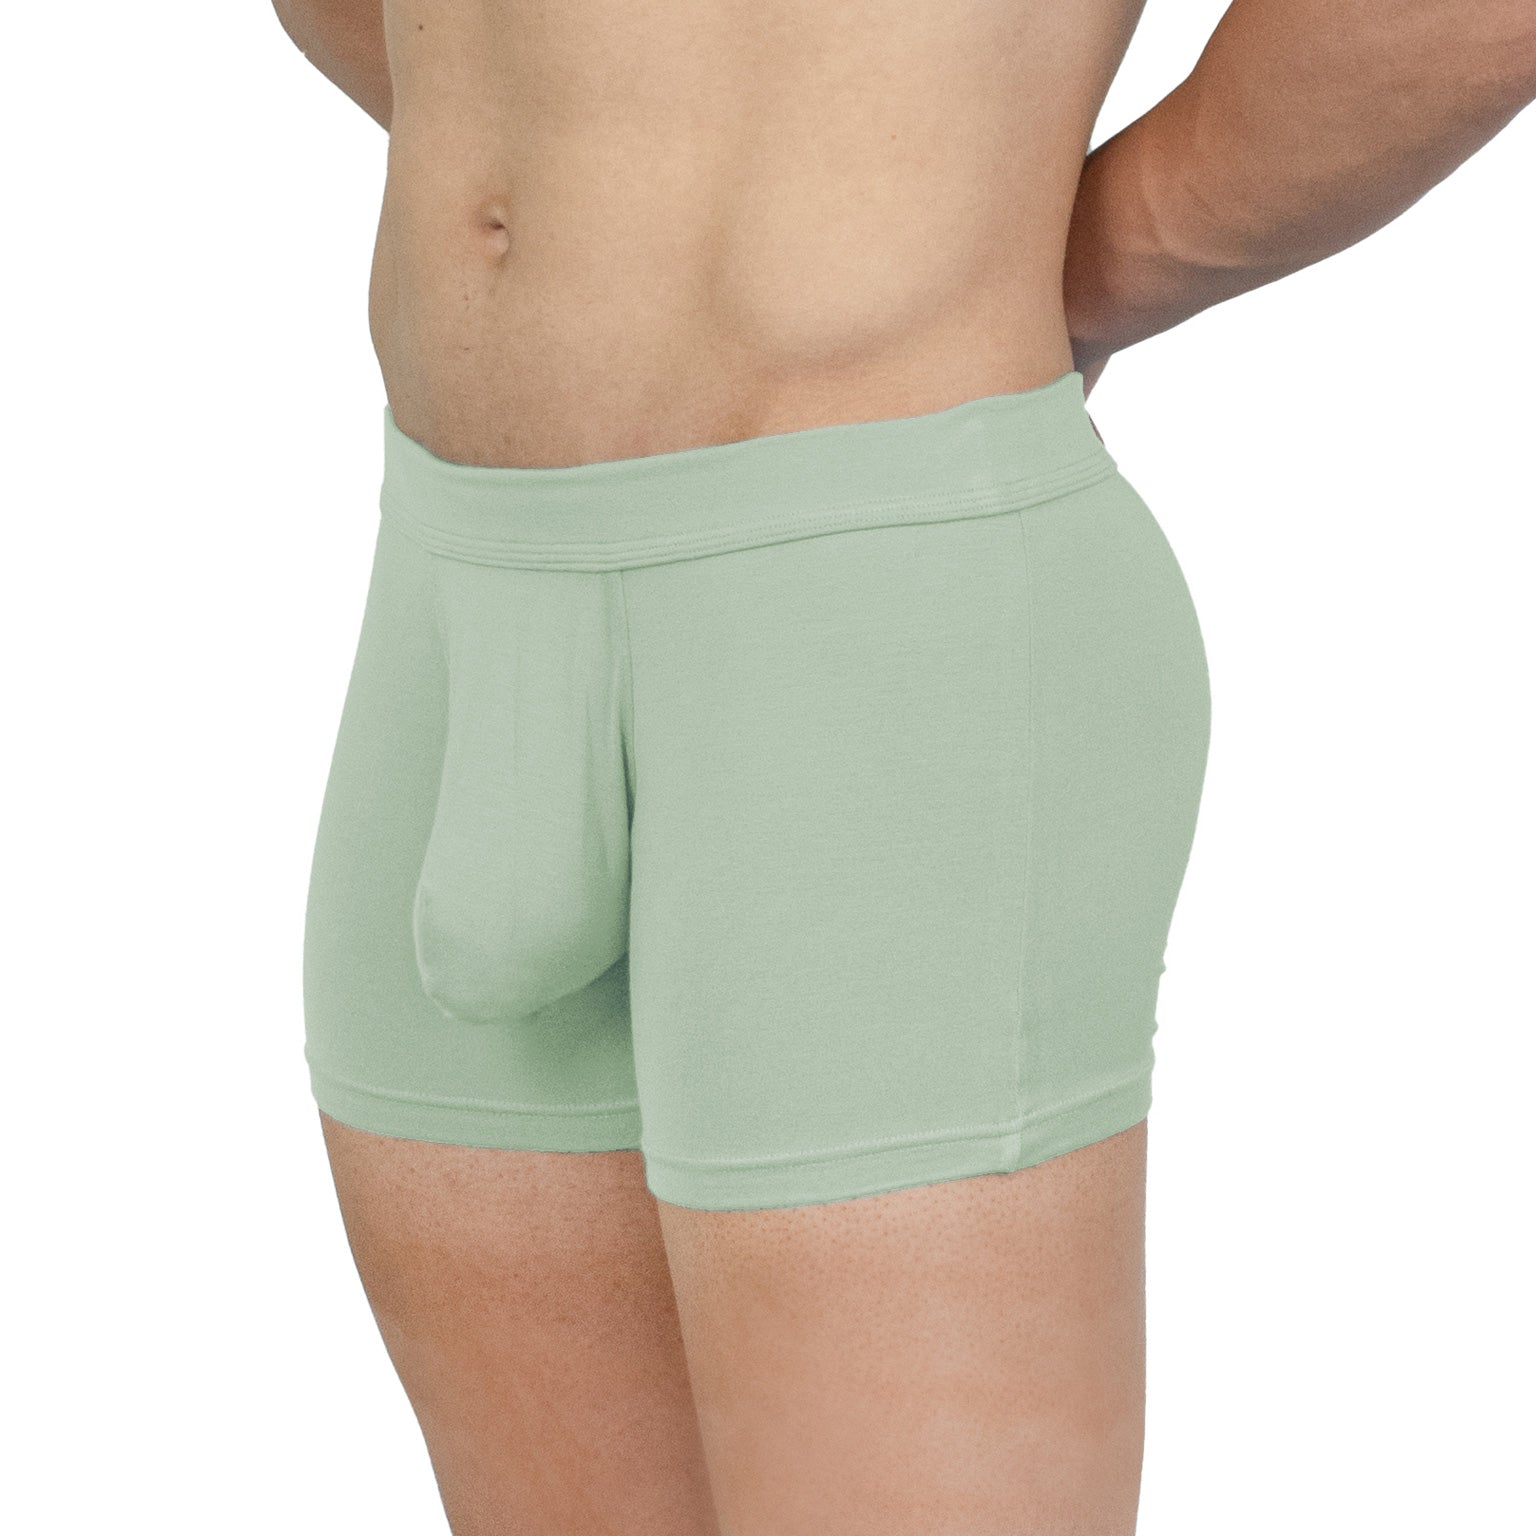 The Many Benefits of Wearing Spandex Boxer Briefs